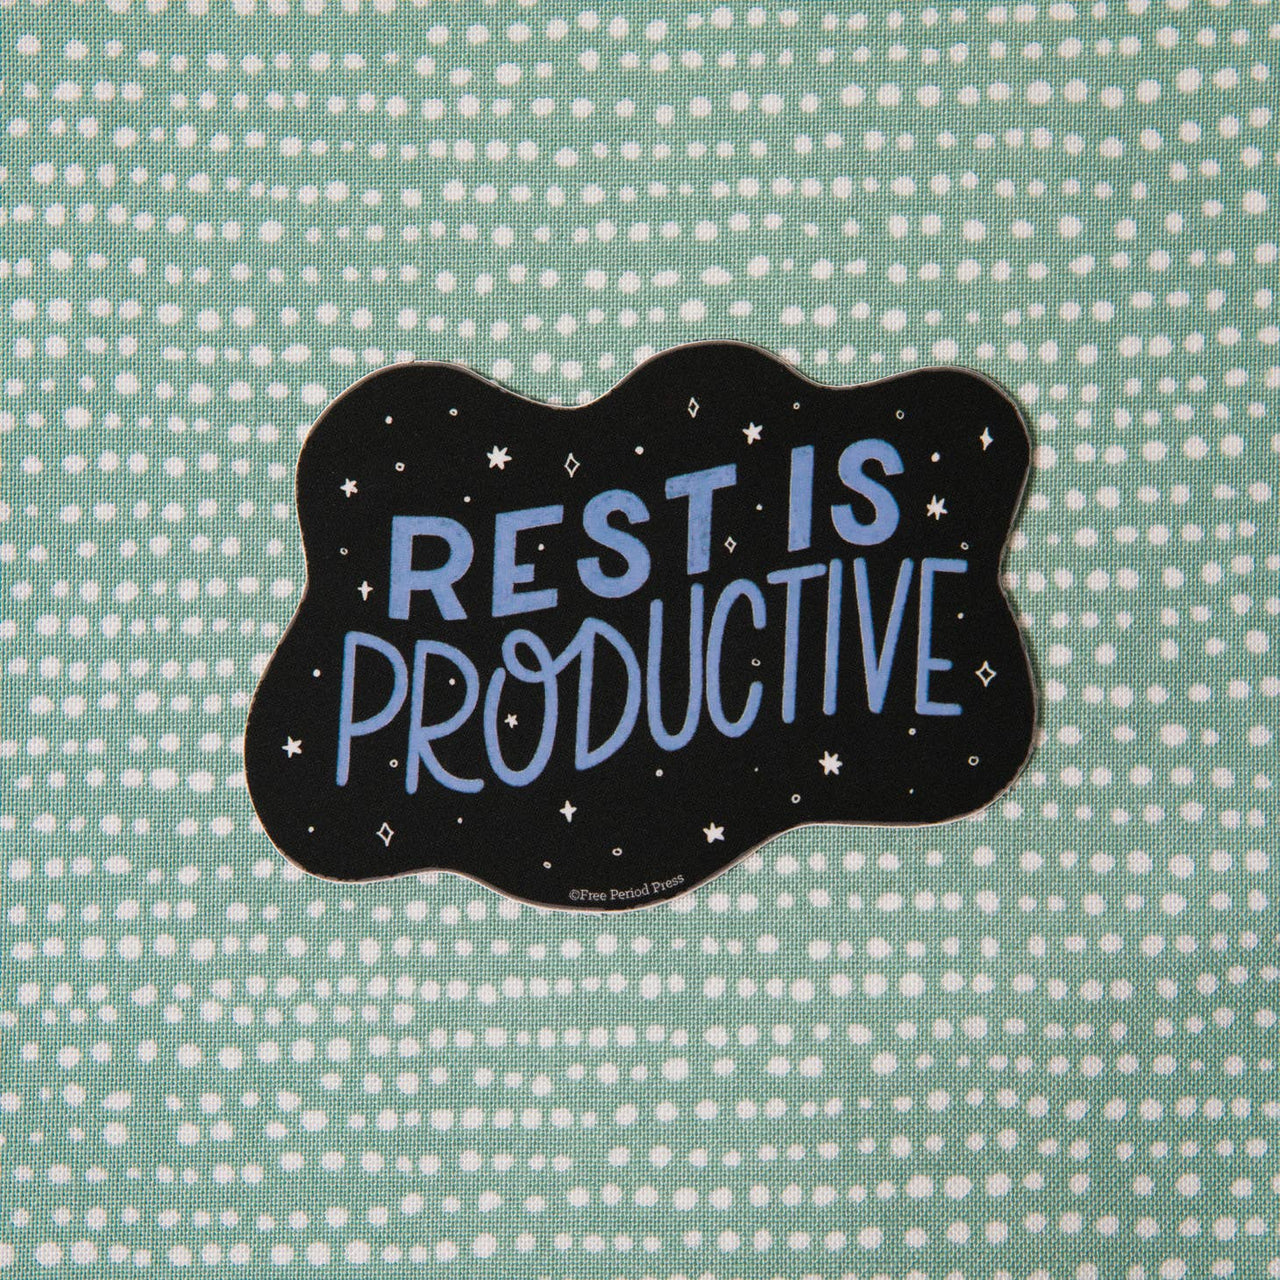 Free Period - Rest Is Productive Sticker